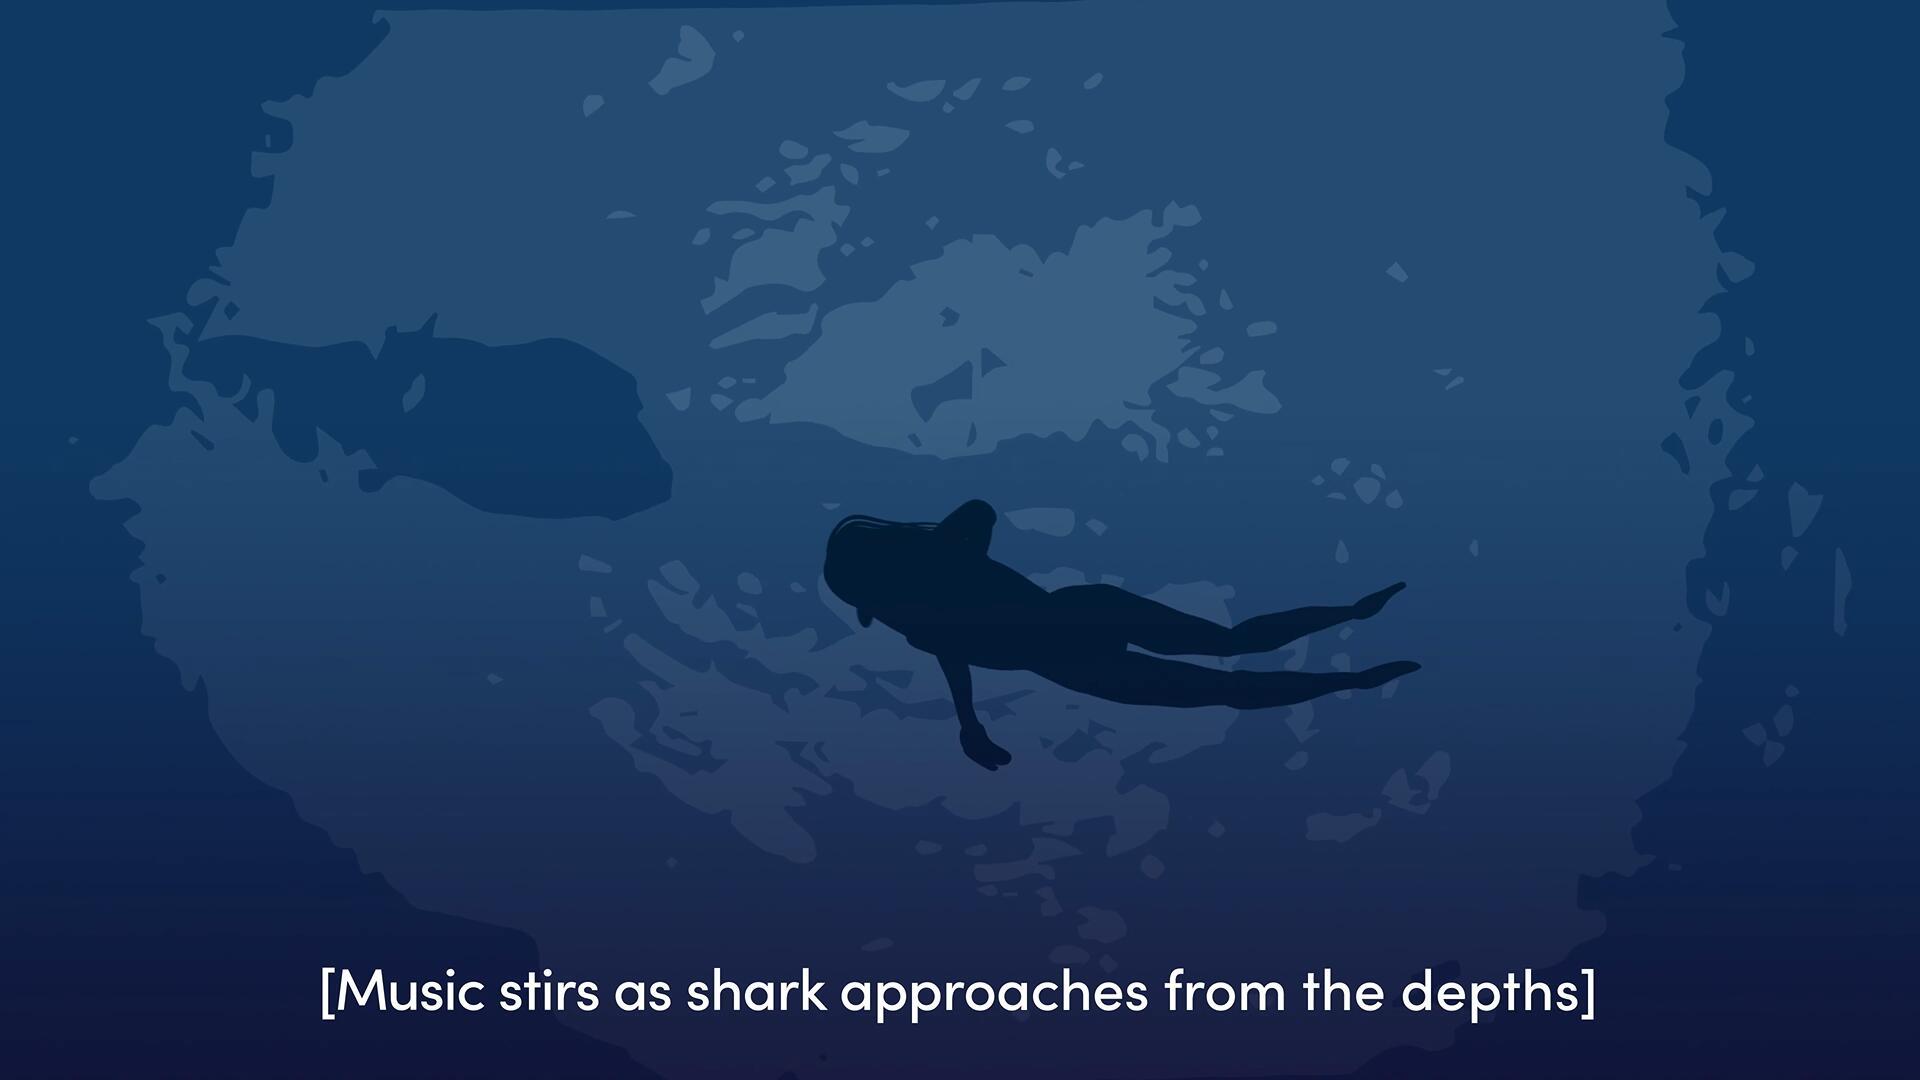 Illustration of a woman swimming in the ocean from below, with the caption "music stirs as shark approaches from the depths"